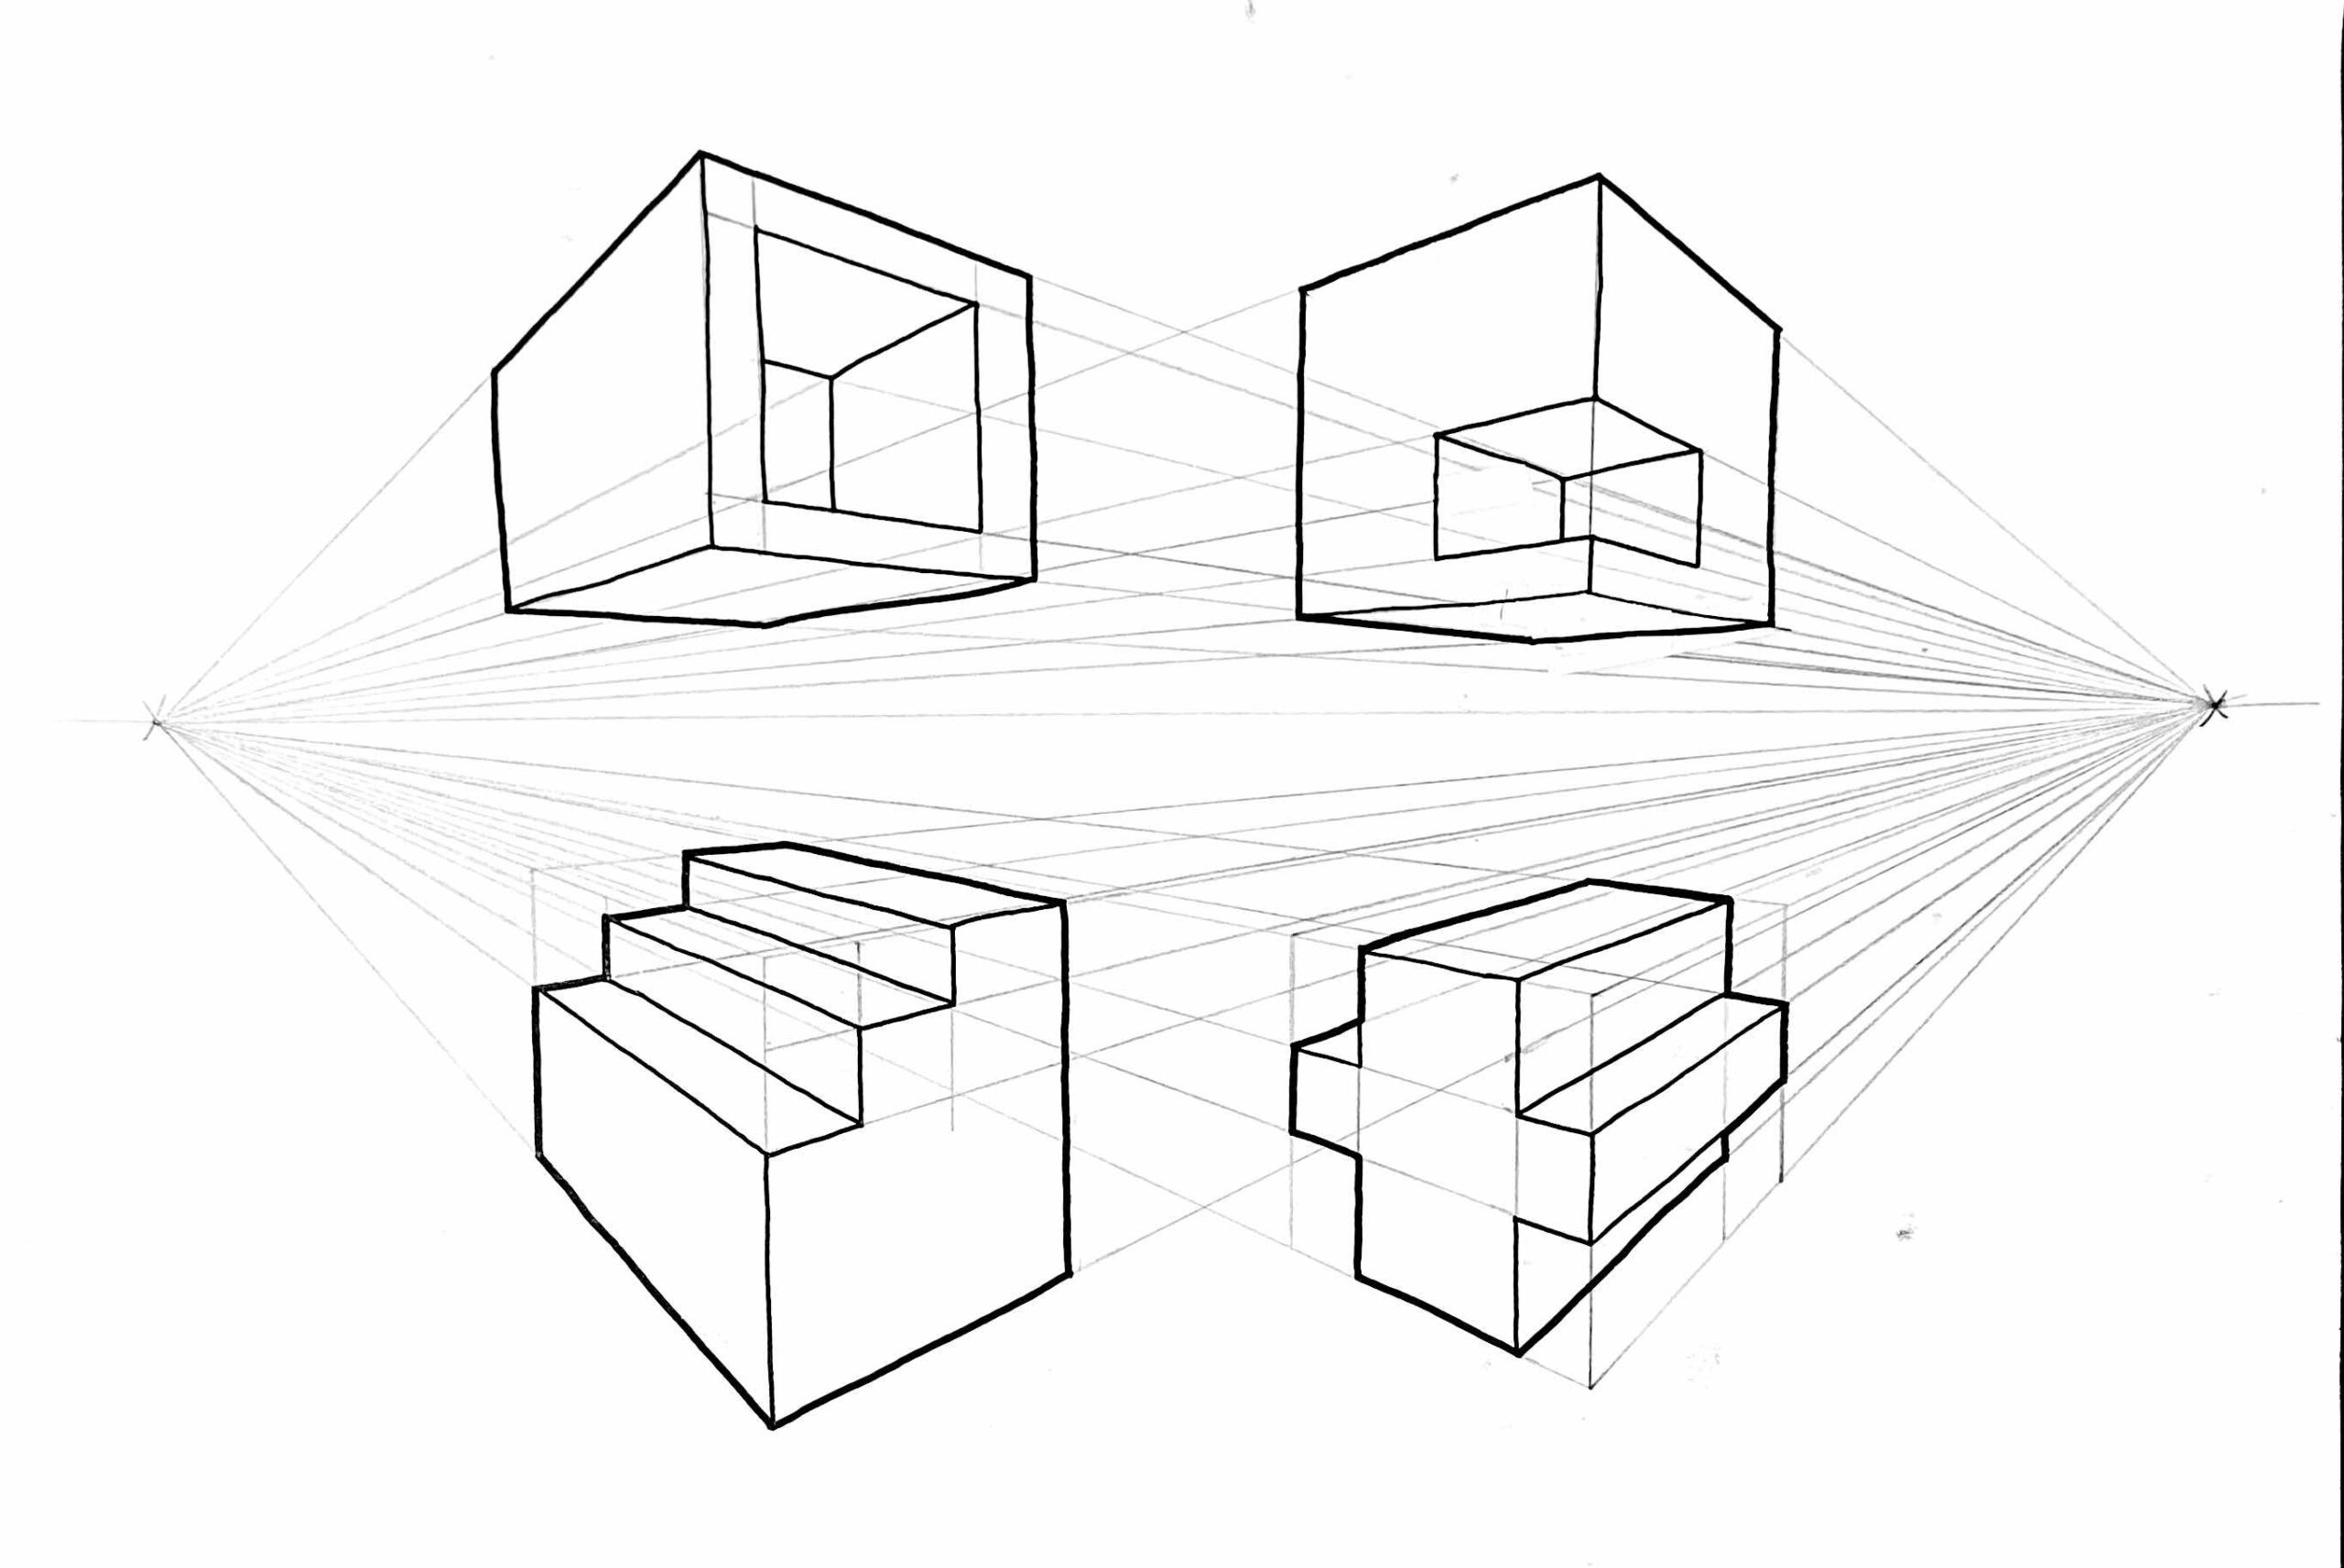 Choose the correct sequence of steps to draw an isometric sketch of cuboid  of dimension 4 times 3 times 3 . Steps are given as below may be in jumbled  order, identify